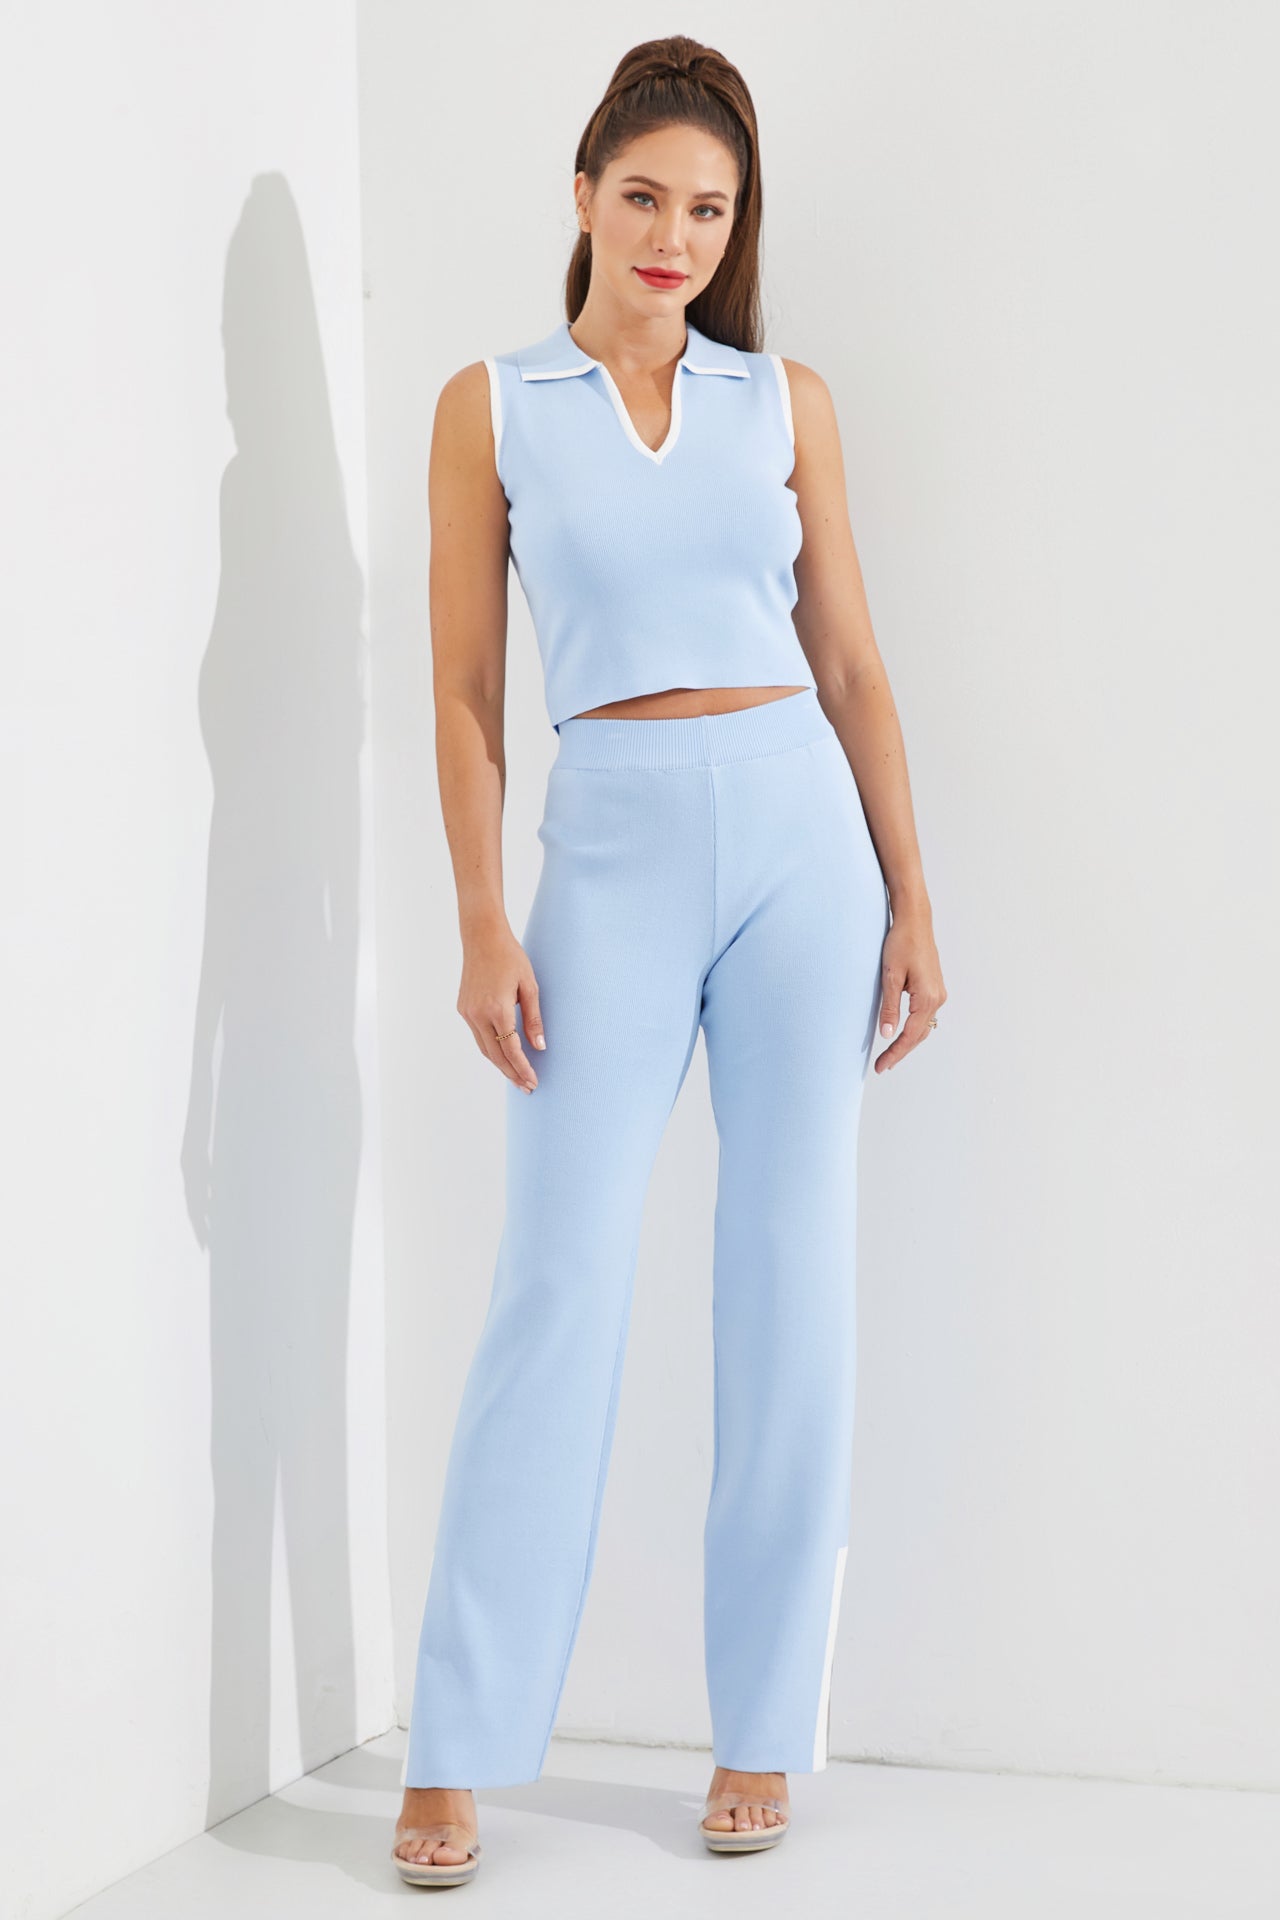 Sleeveless Collared Top and Pants Set